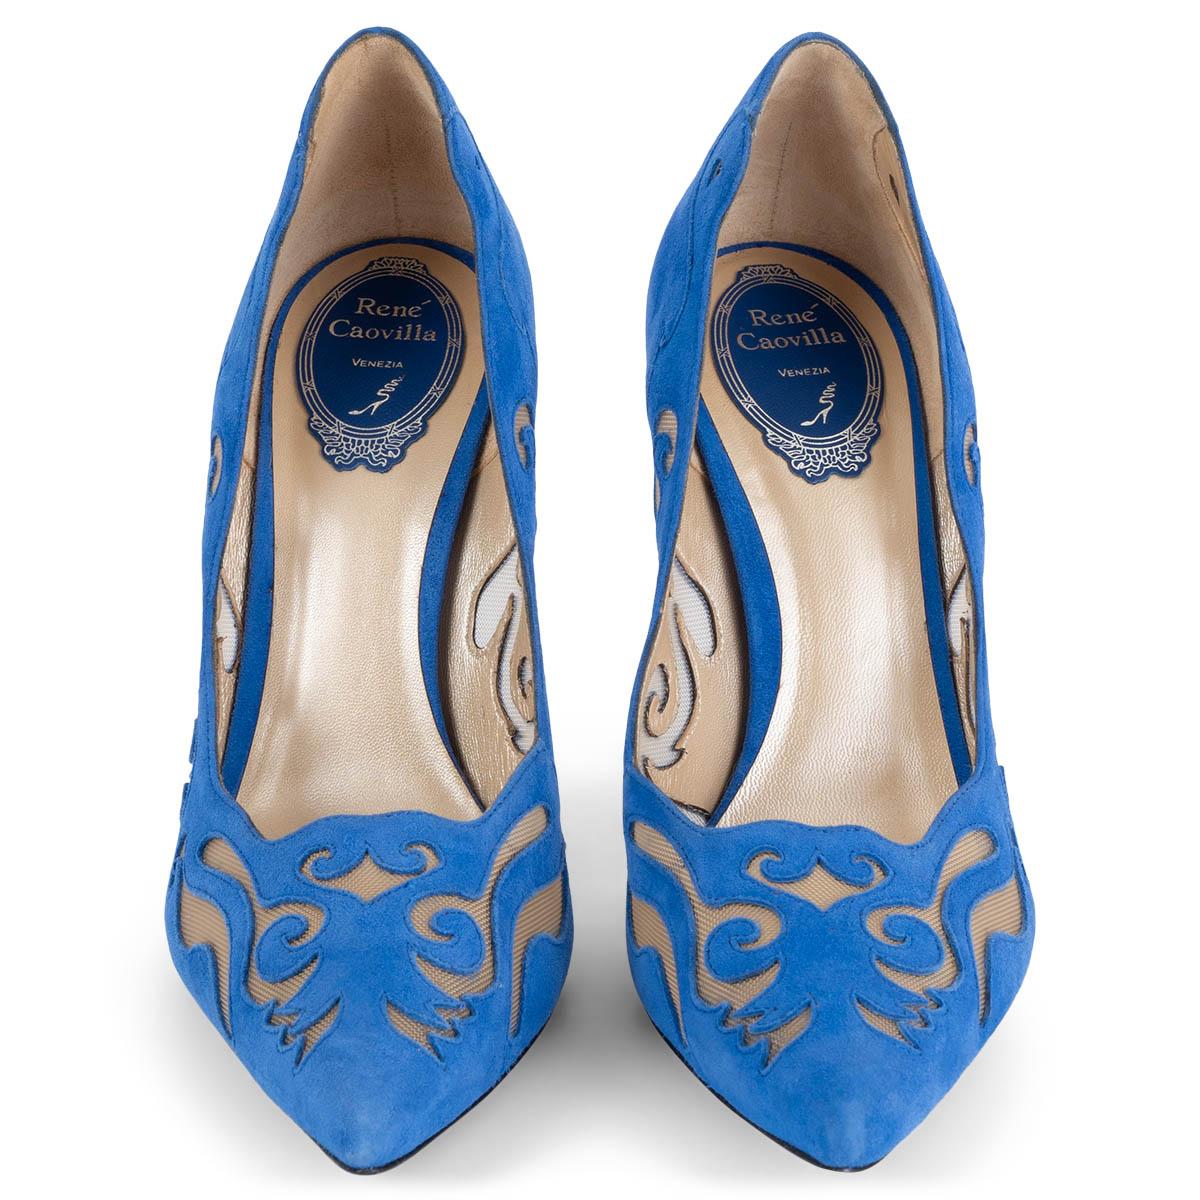 100% authentic René Caovilla Illusion laser-cut pointed-toe pumps in cobalt blue suede and nude mesh. Brand new. 

Measurements
Imprinted Size	38.5
Shoe Size	38.5
Inside Sole	25.5cm (9.9in)
Width	7.5cm (2.9in)
Heel	12cm (4.7in)

All our listings